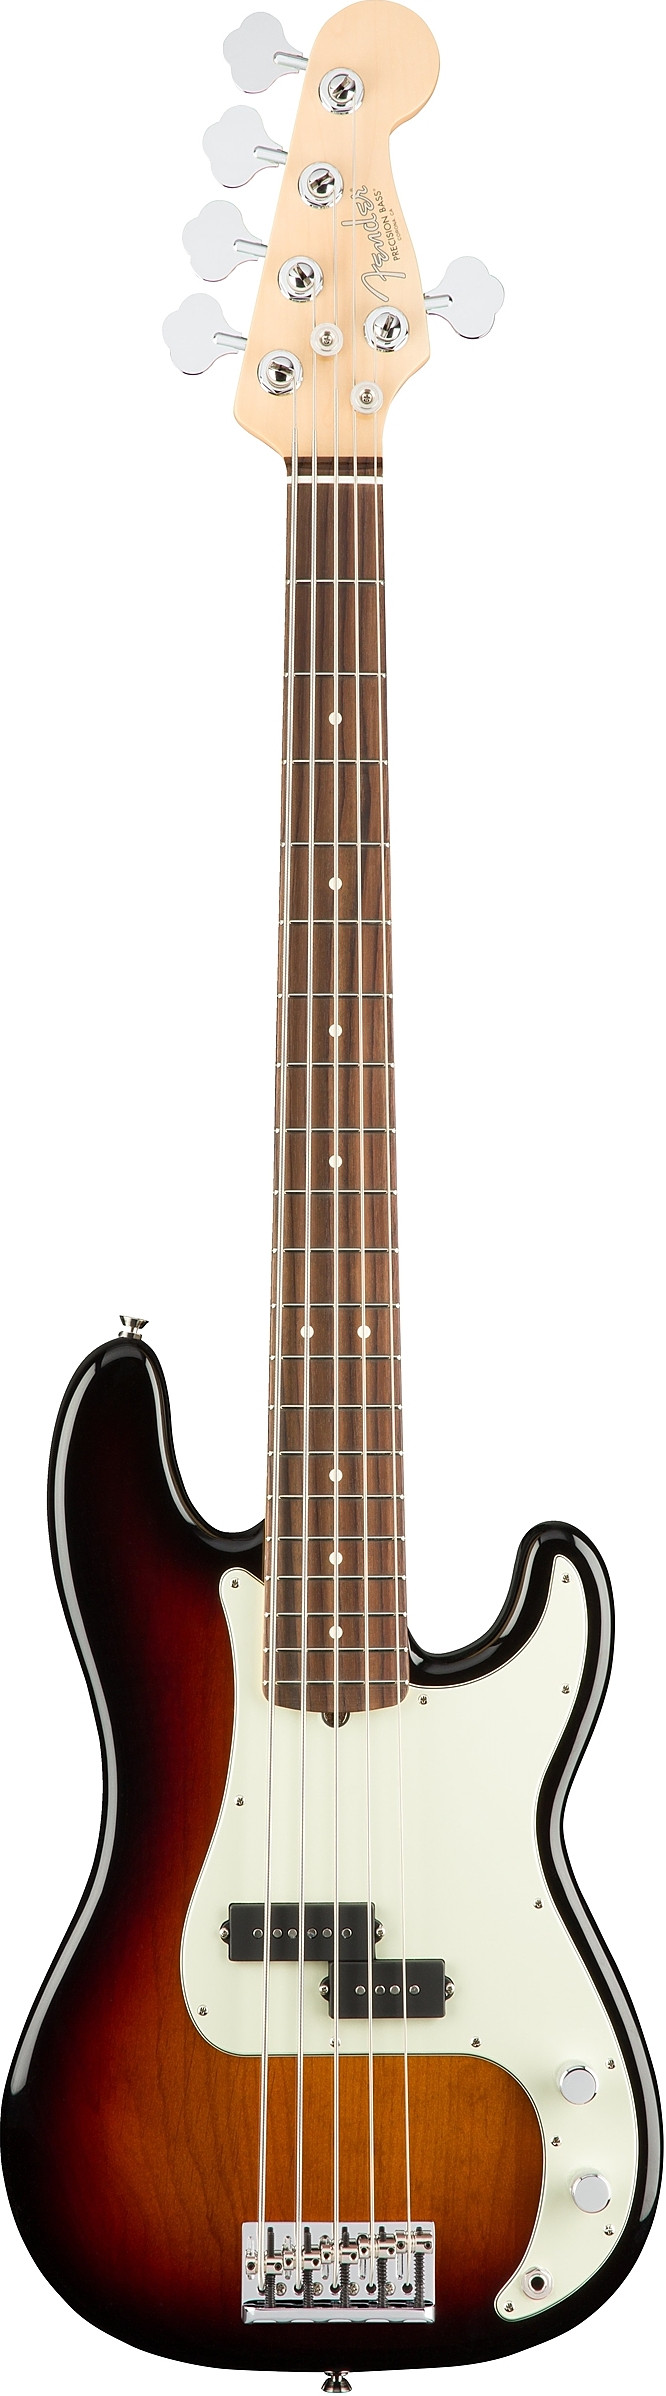 American Professional Precision Bass V by Fender